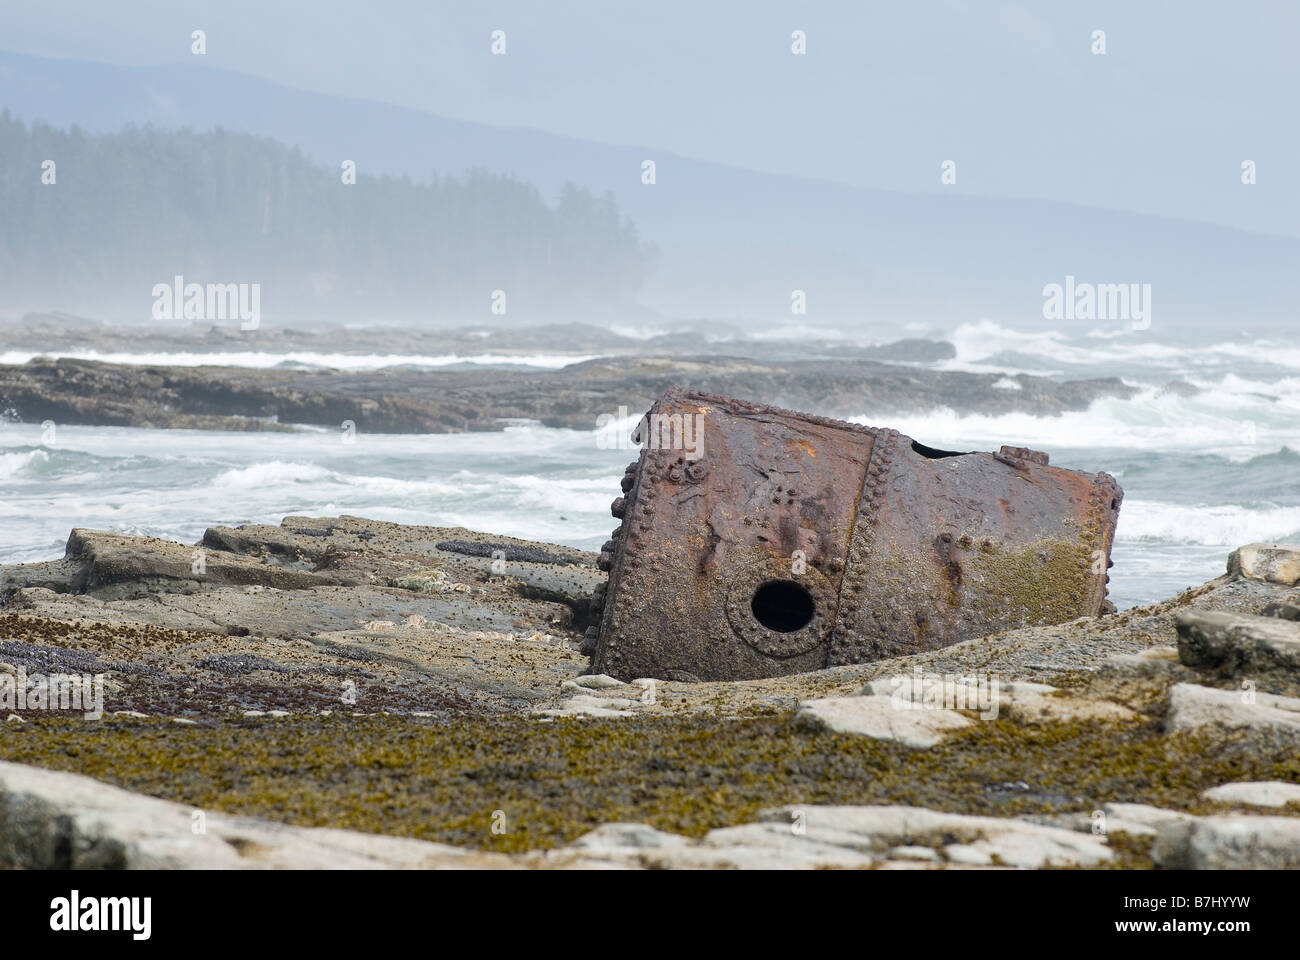 Rusty Steamship Boiler that has been in this place since the ship wrecked in 1898, Pacific Rim National Park, B.C. Stock Photo